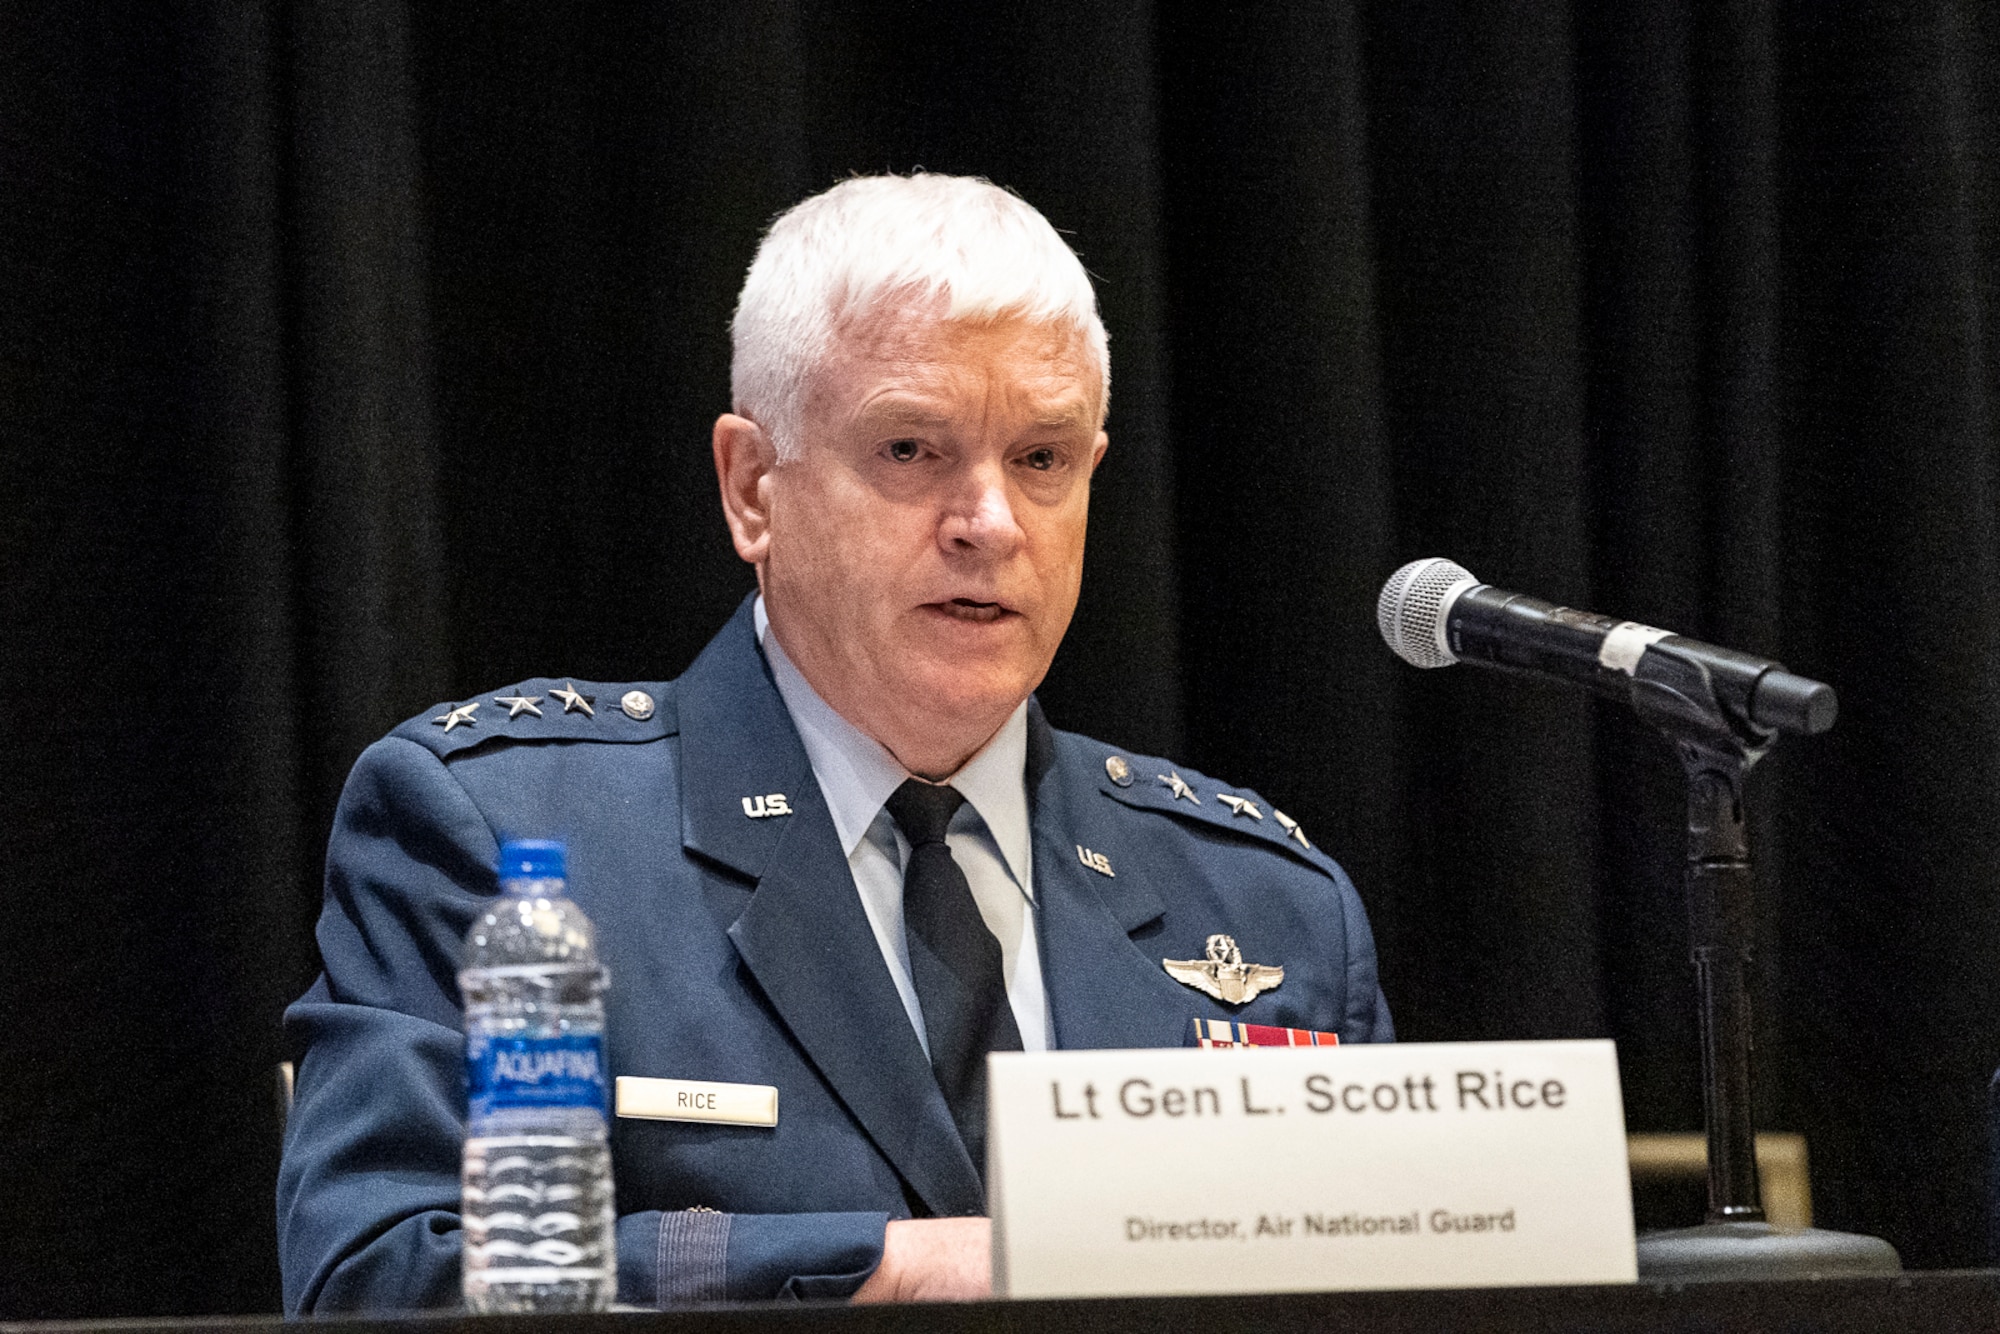 Lt. Gen. Scott L. Rice, Air National Guard director participates in the 'using the competitive edge to train how we fight' panel during the Air Force Association Air, Space and Cyber Conference in National Harbor, Maryland, Sept. 18, 2019. The ASC Conference is a professional development seminar that offers the opportunity for Department of Defense personnel to participate in forums, speeches and workshops. (U.S. Air Force photo by Tech. Sgt. D. Myles Cullen)